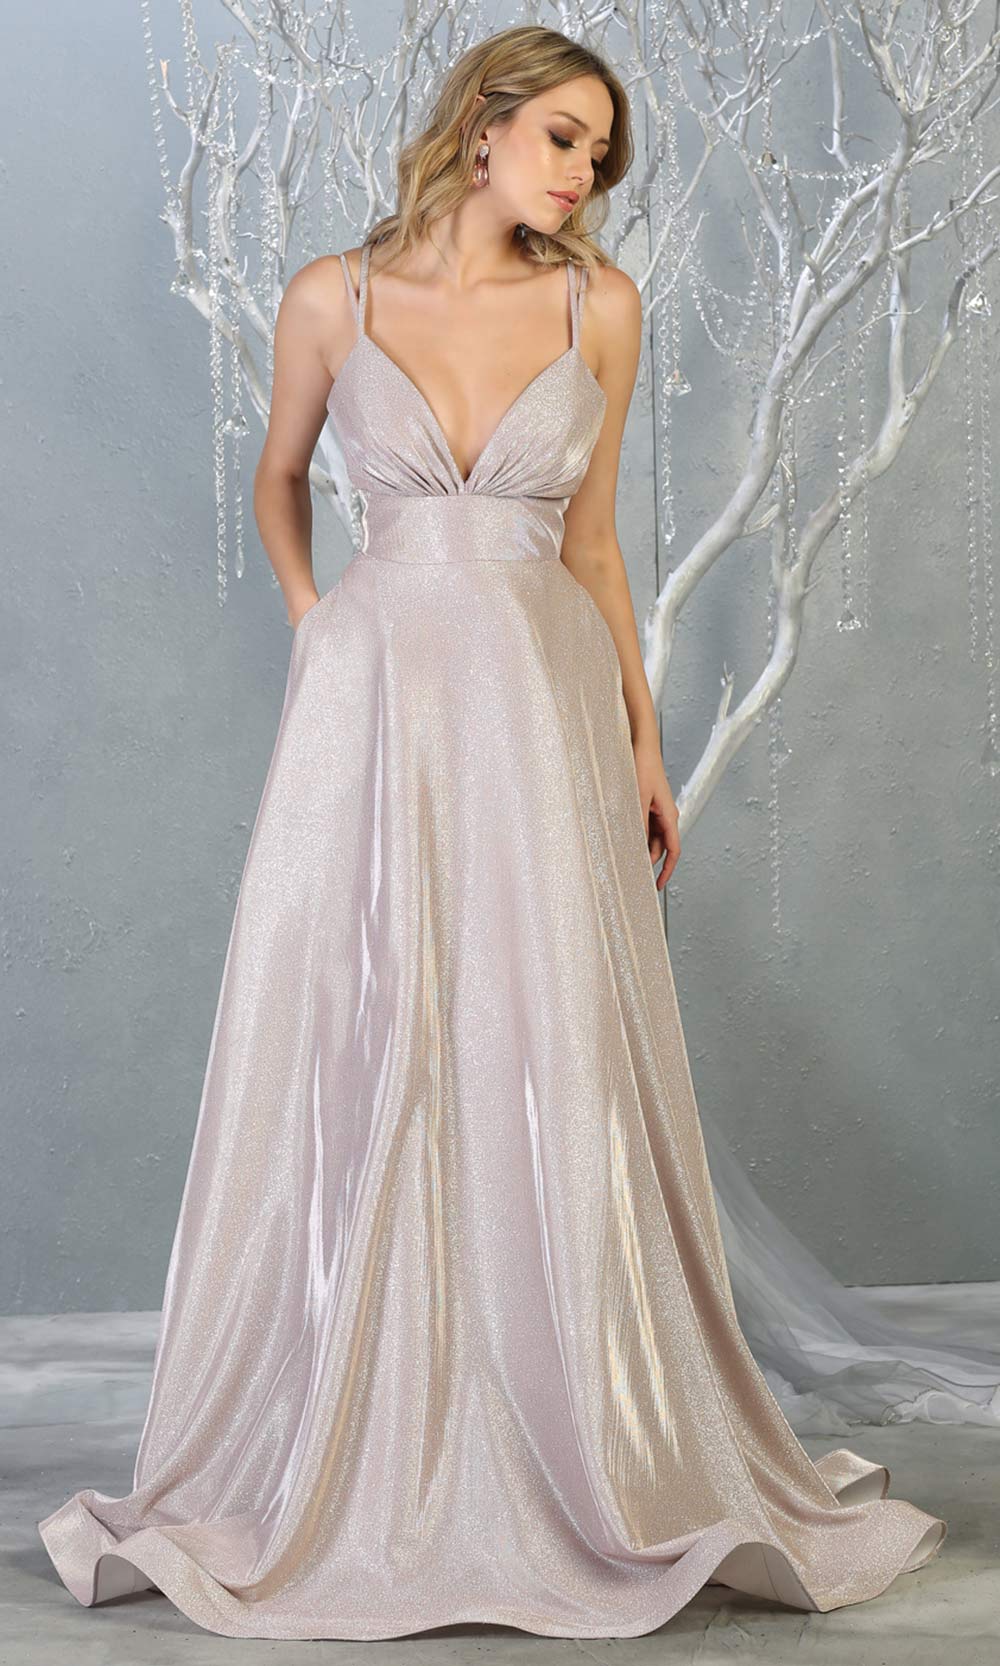 Mayqueen MQ1756 long rose gold metallic evening flowy dress w/low back & straps. Full length rose gold gown is perfect for enagagement/e-shoot dress, wedding reception dress, indowestern gown, formal evening party dress, prom. Plus sizes avail.jpg